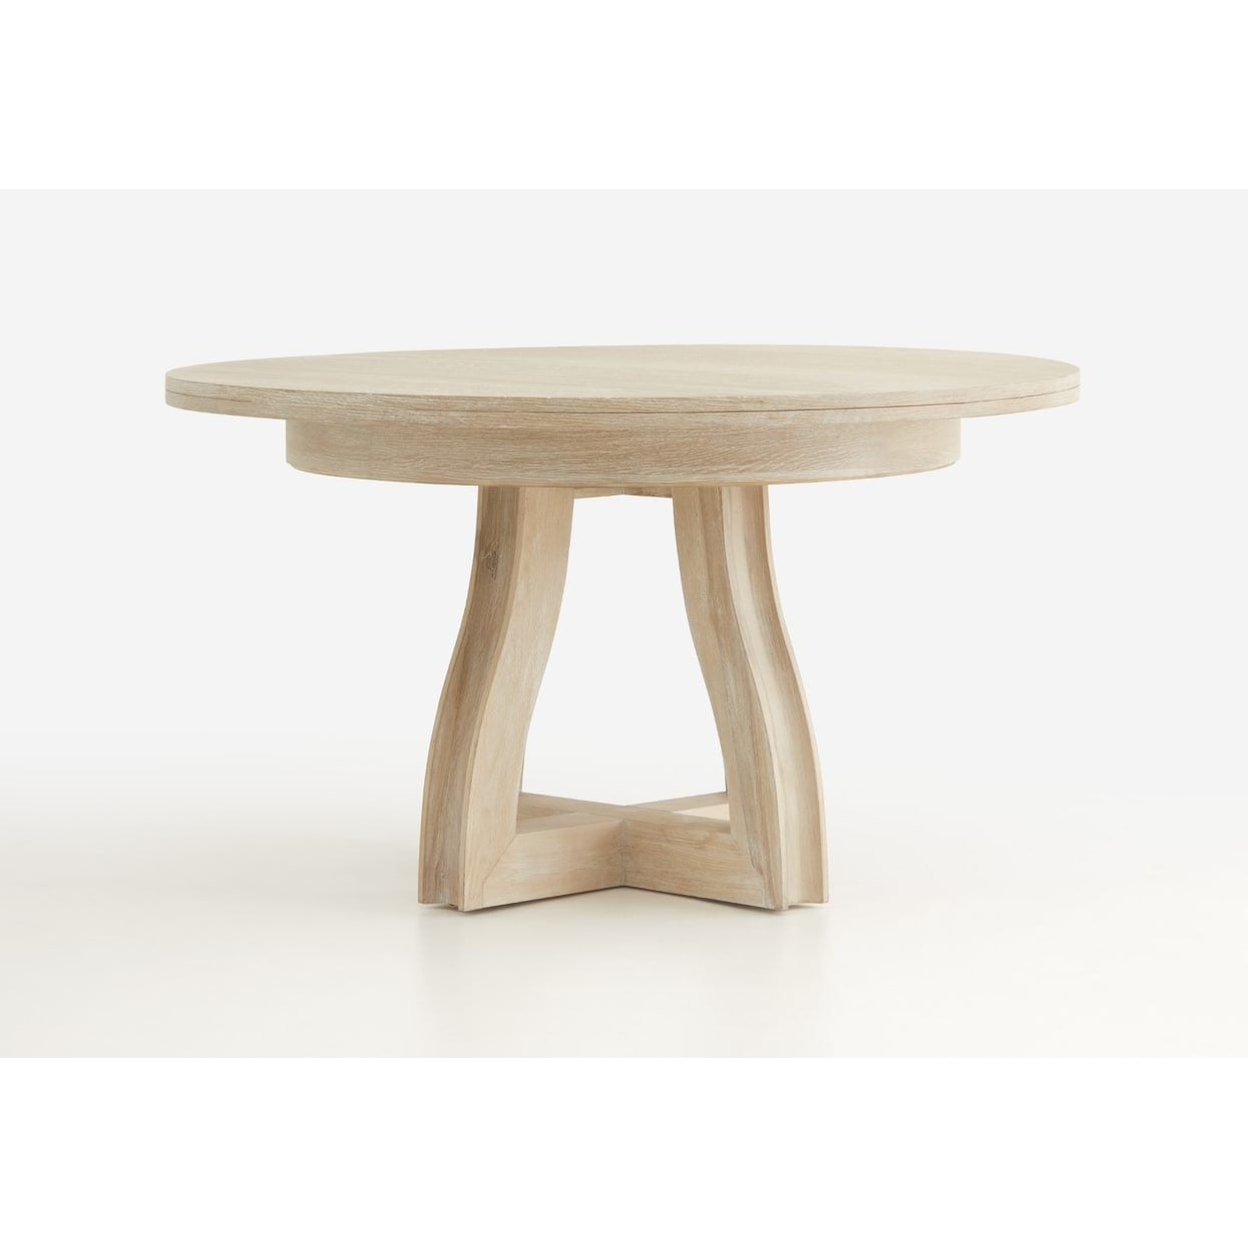 Thirty-One Twenty-One Home Ivory Bay Round Dining Table